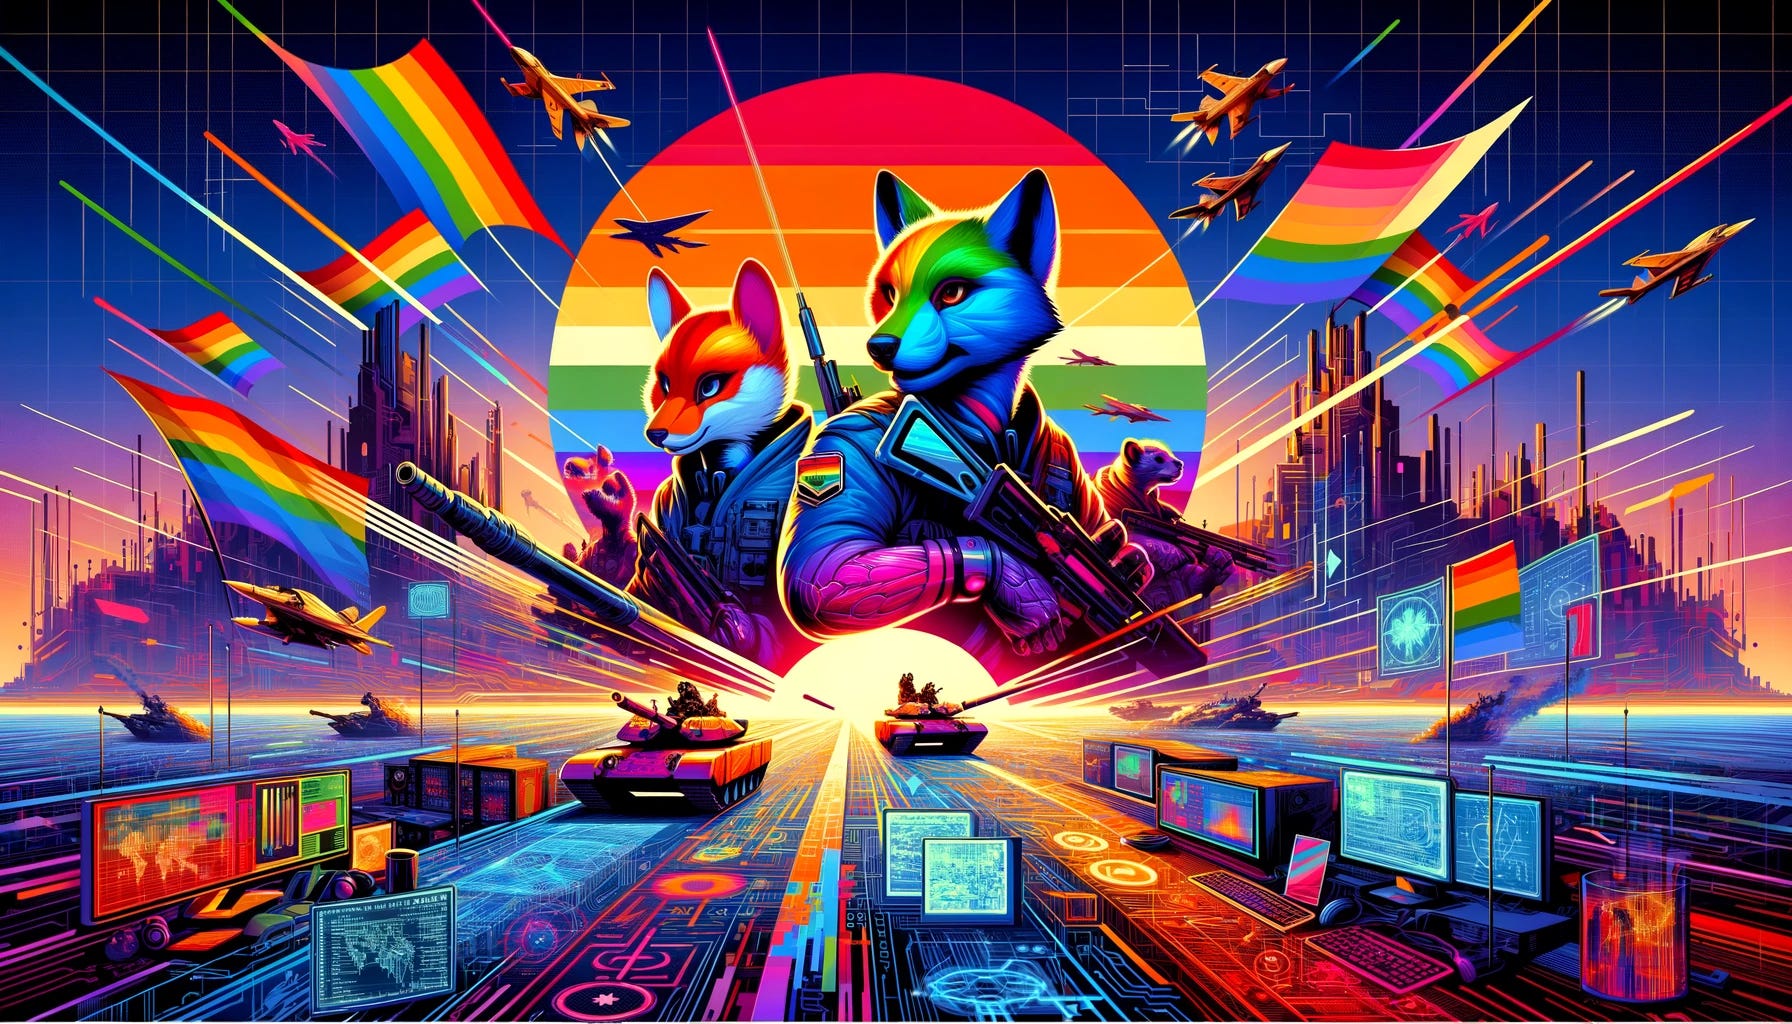 A futuristic and abstract digital artwork for a blogpost header, reimagined for the title 'Gay Furry Hackers on the Frontlines of a Cyberwar'